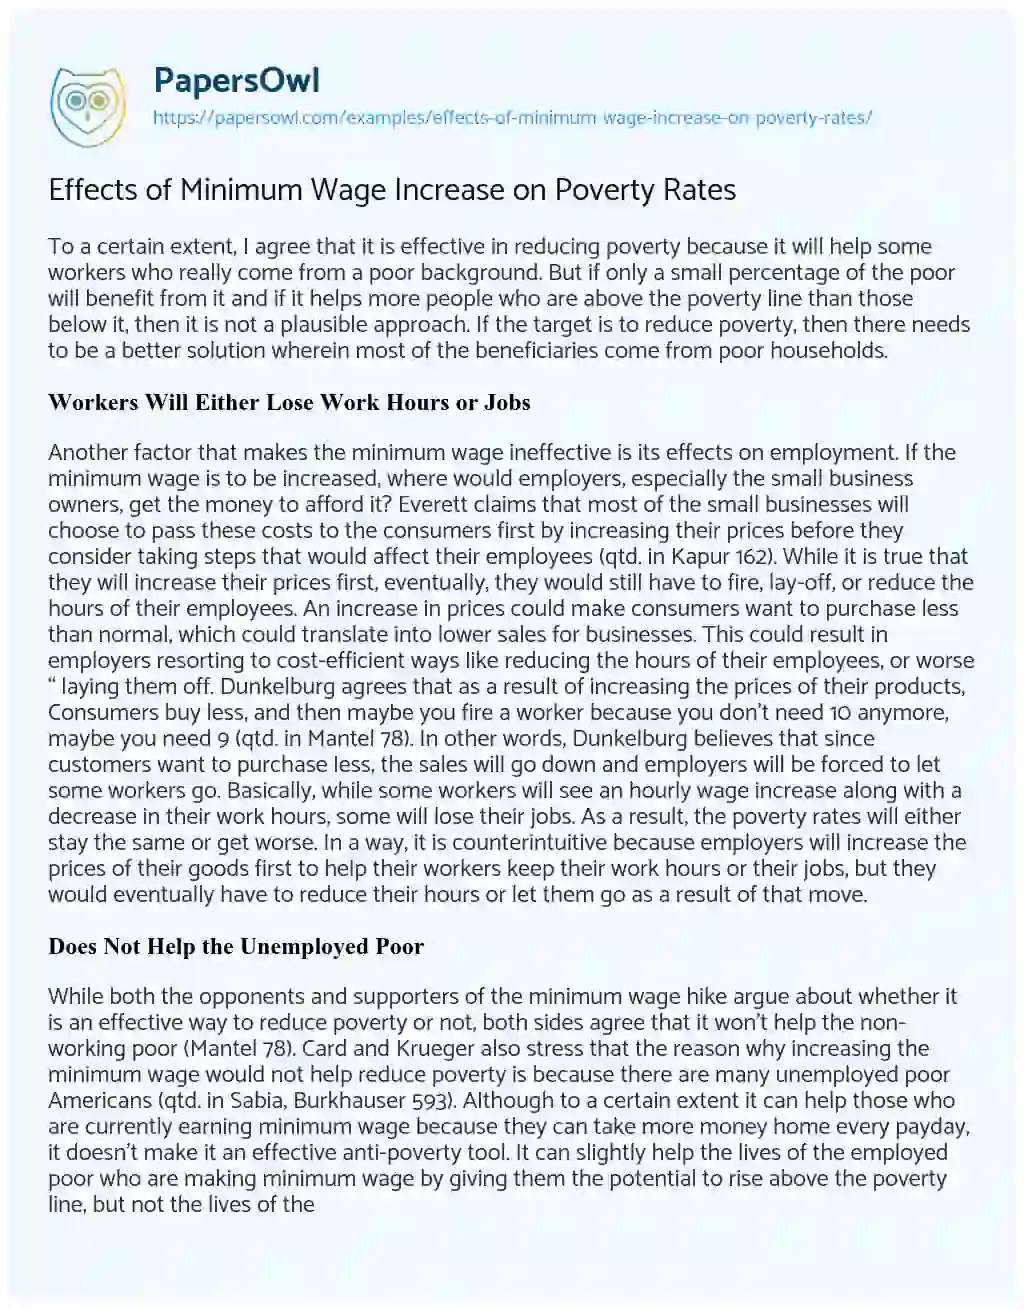 Effects of Minimum Wage Increase on Poverty Rates essay